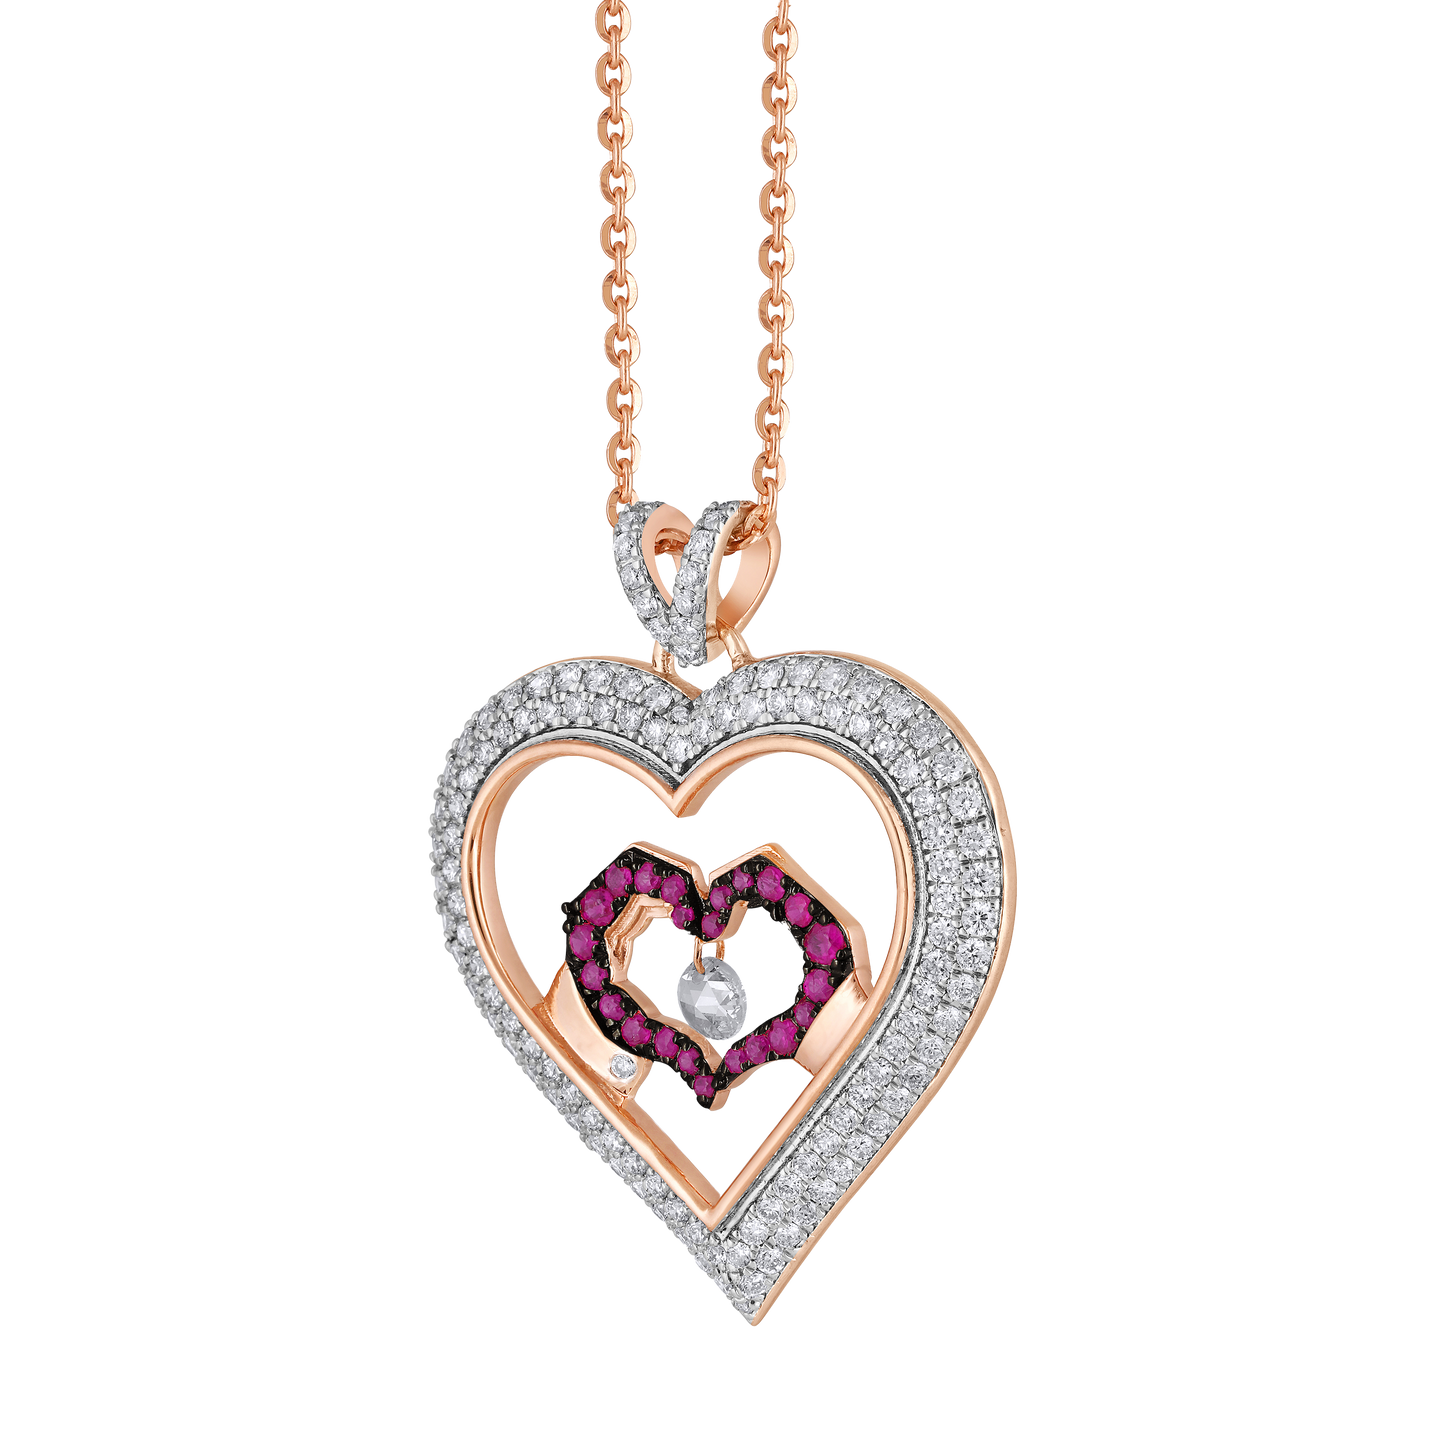 Hold Her Heart Pendant with Chain